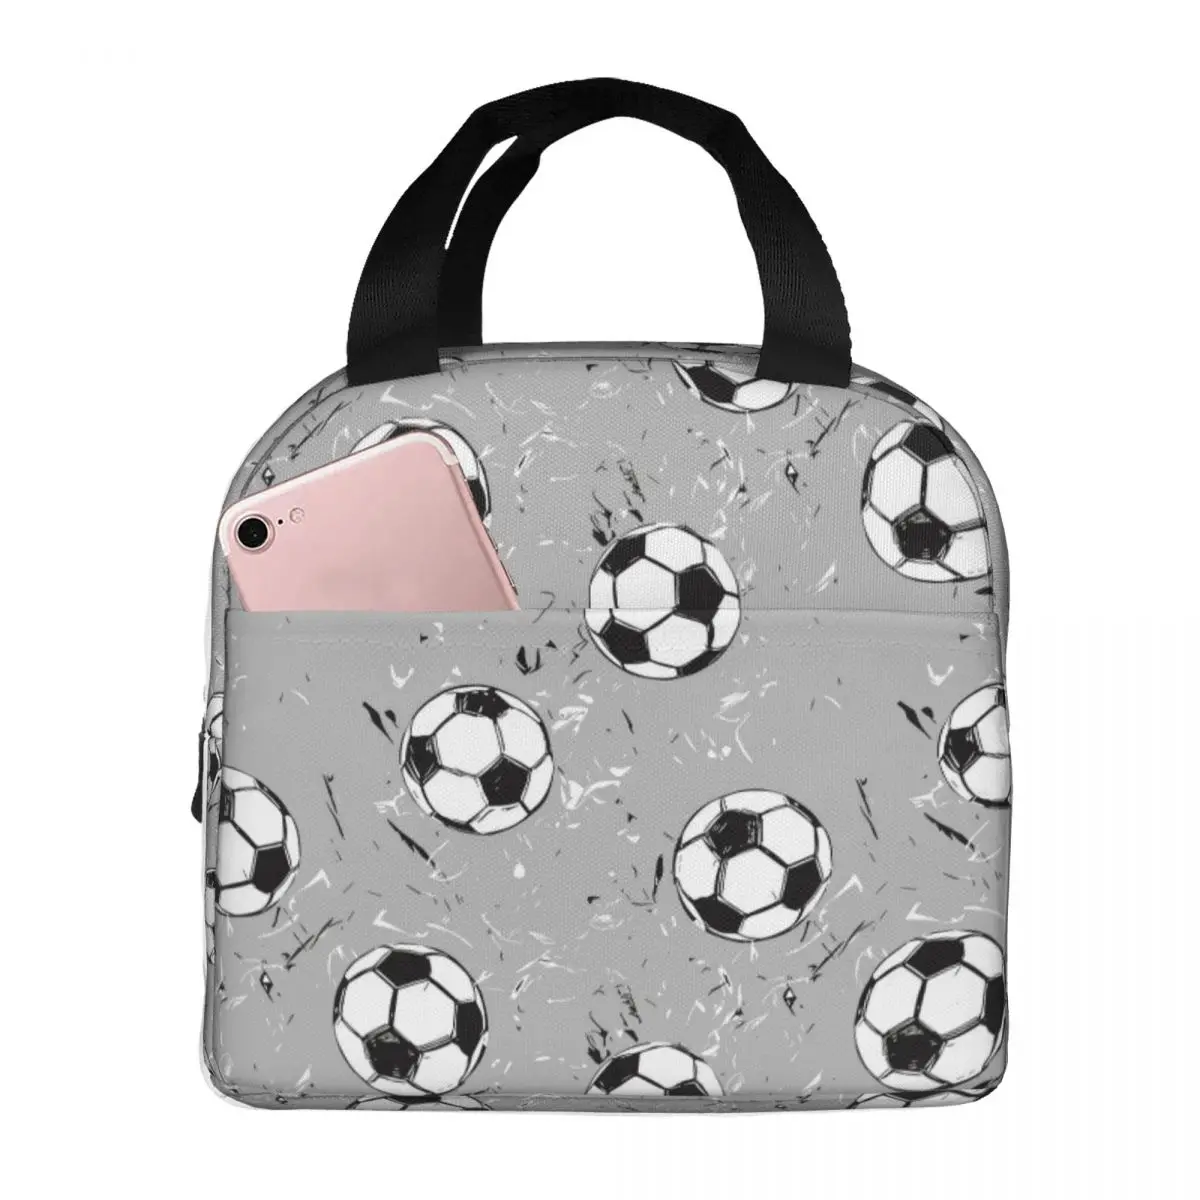 Footballs Soccer Lunch Bags Waterproof Insulated Canvas Cooler Bag Thermal Food Picnic Lunch Box for Women Kids